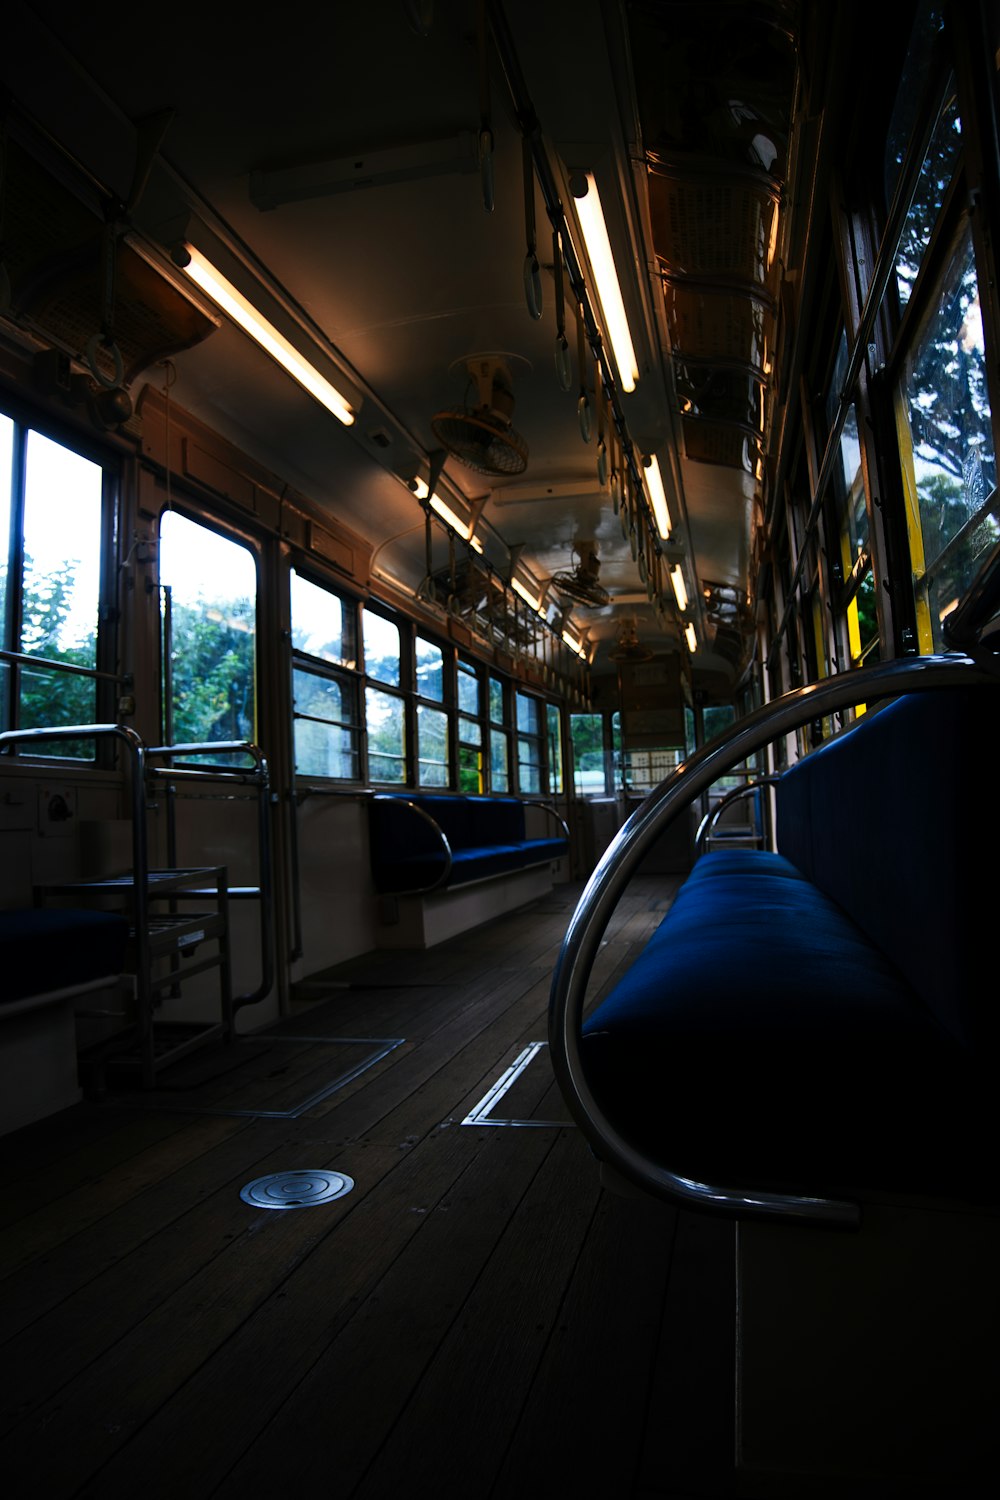 a train car with lots of windows and blue seats